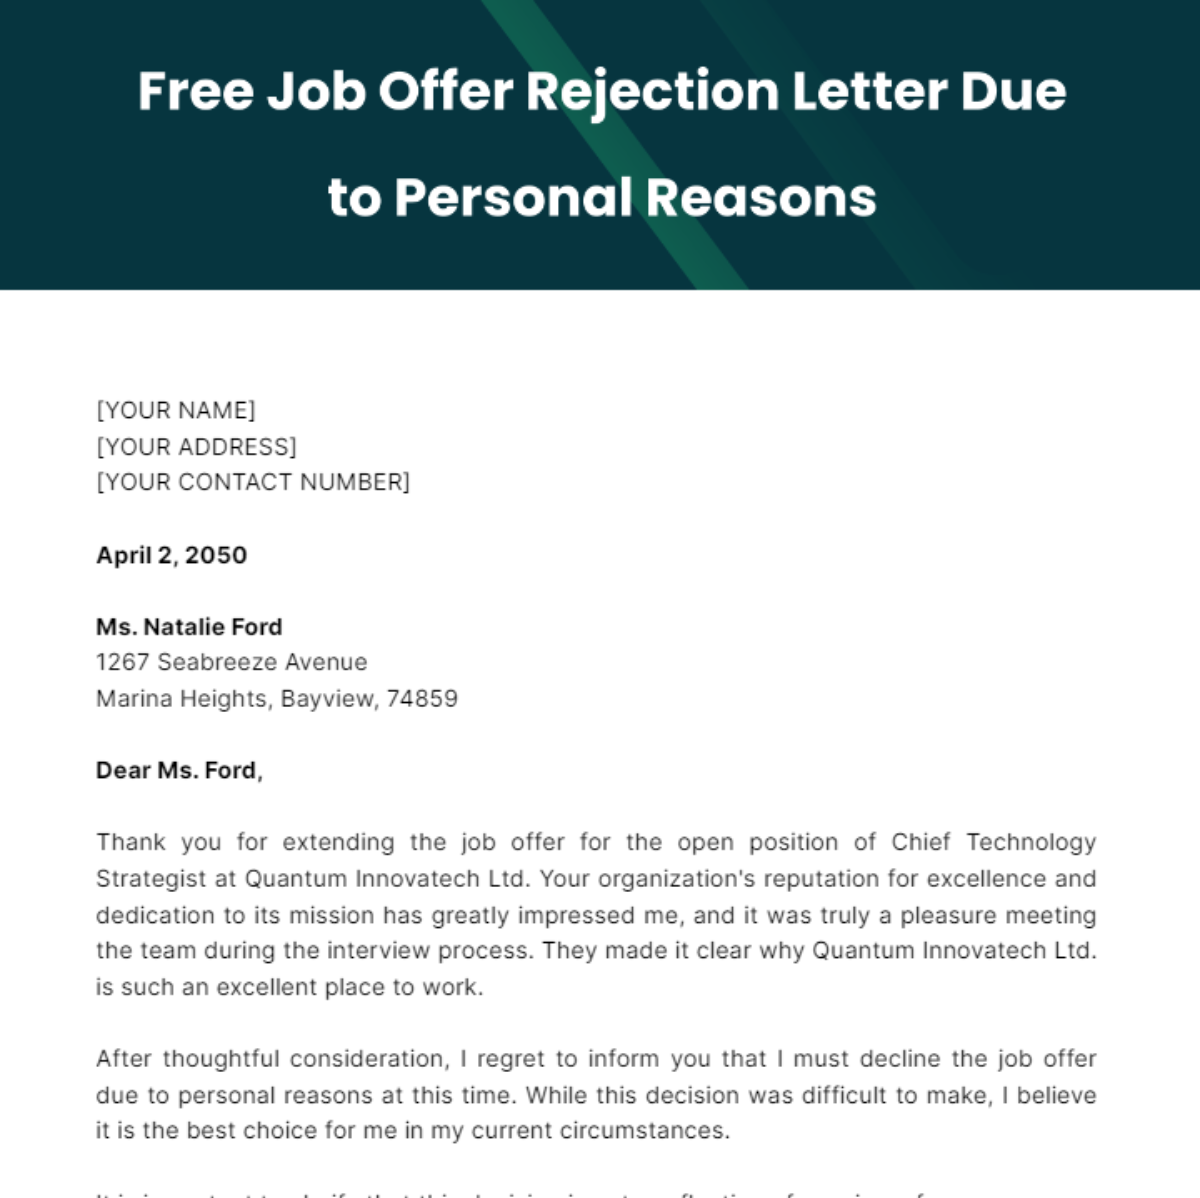 Job Offer Rejection Letter Due to Personal Reasons Template